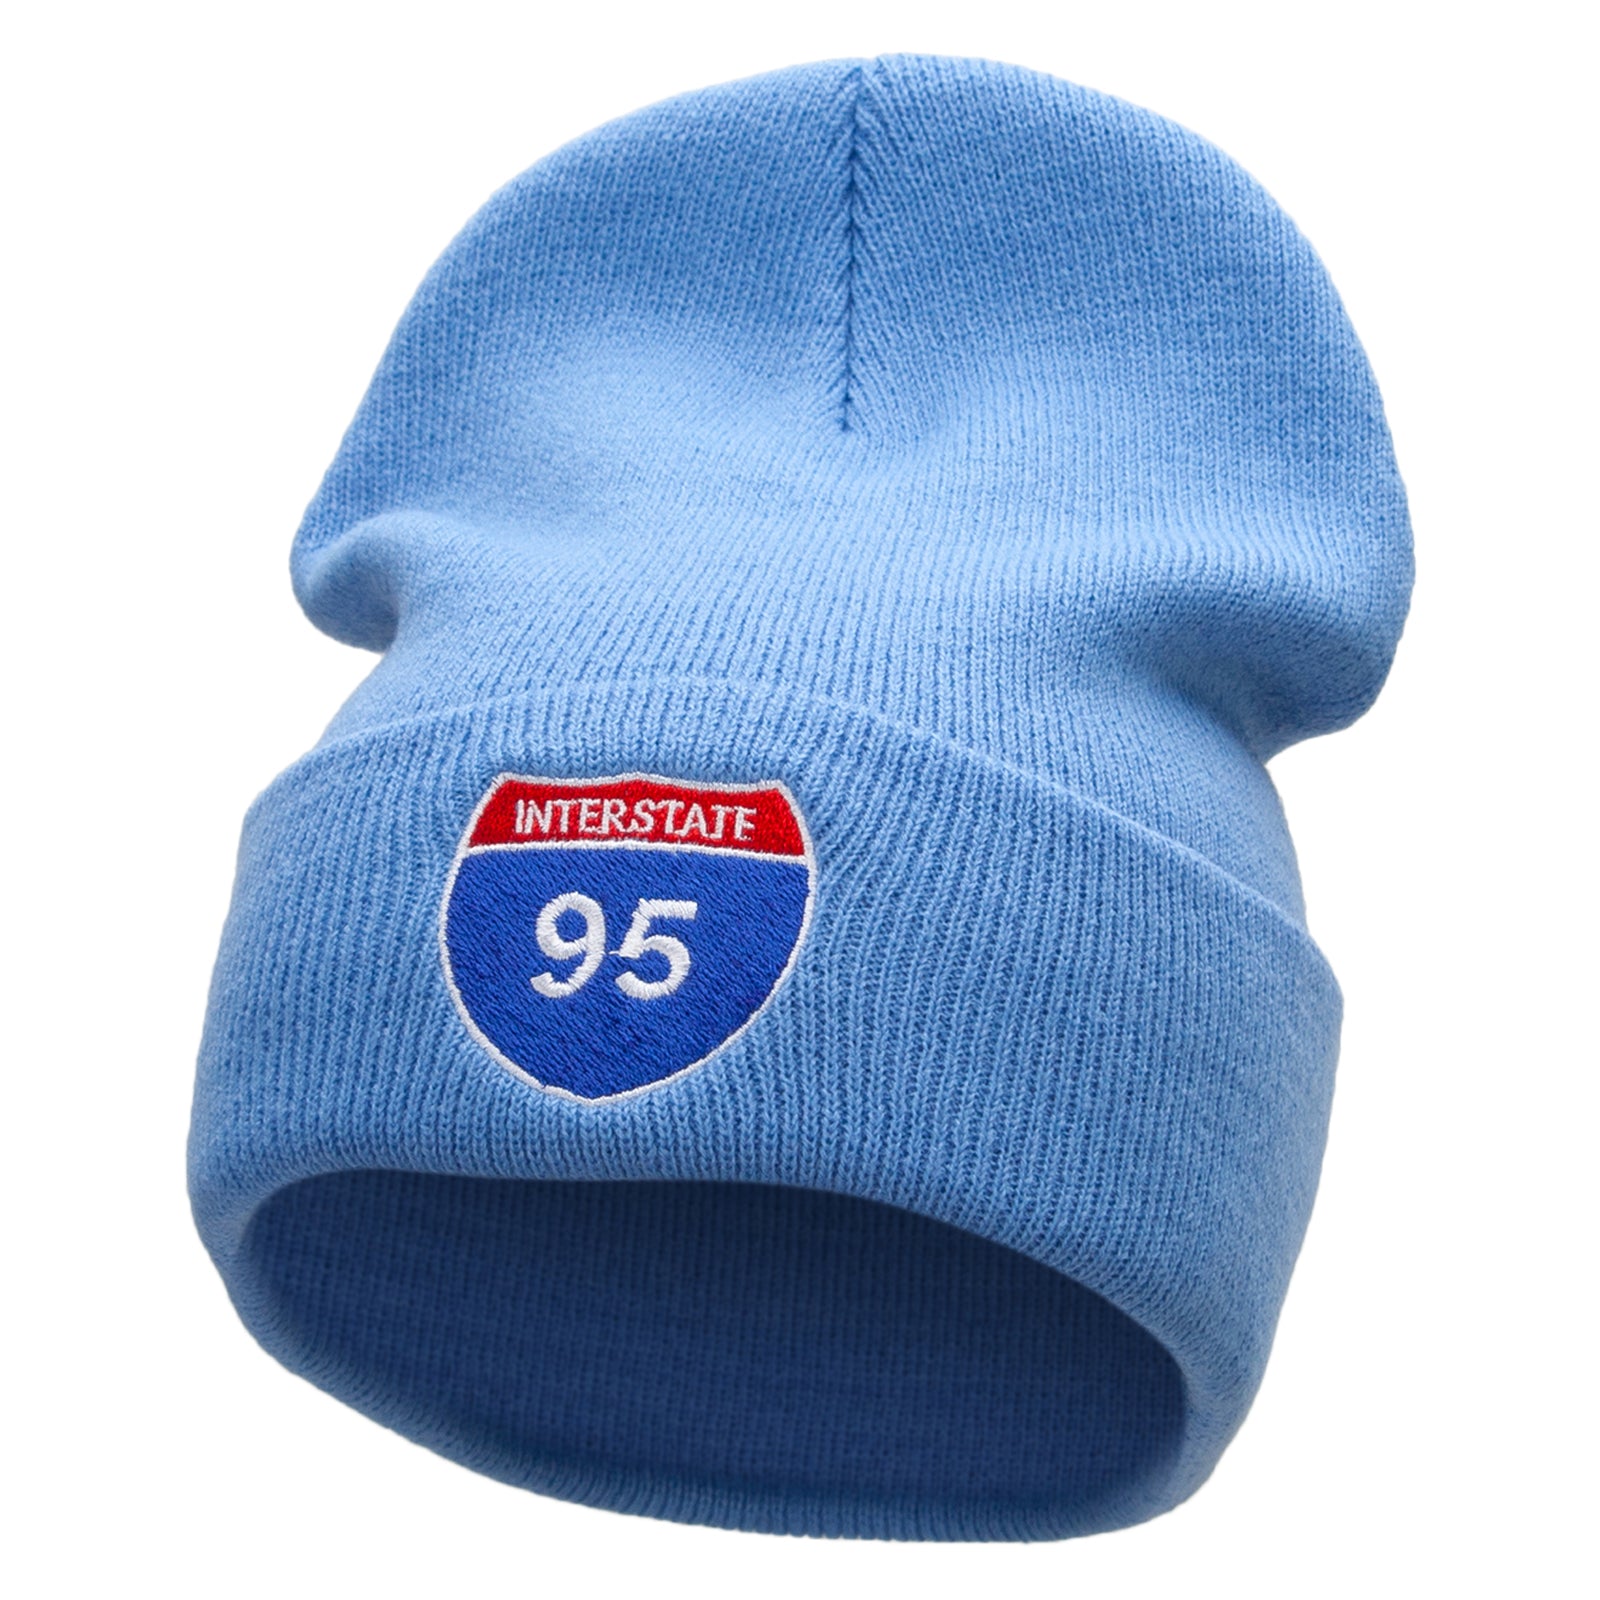 Interstate 95 Sign Embroidered 12 Inch Long Knitted Beanie - Sky Blue OSFM